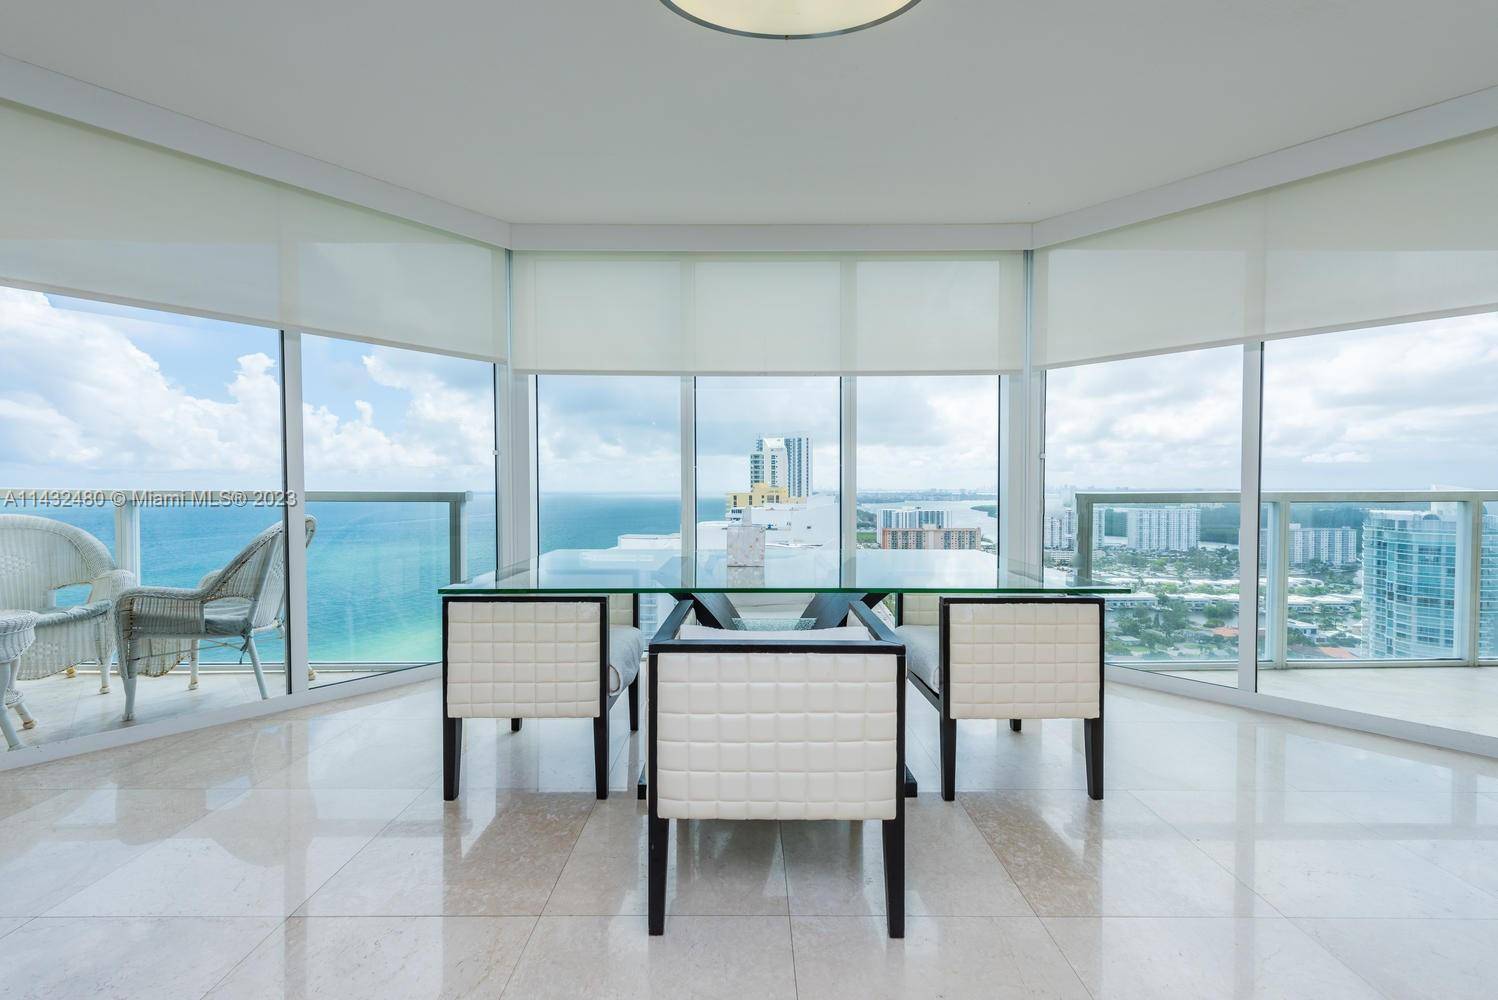 Prepare to be amazed by the incredible views that await you in this 2 bedroom unit at La Perla.